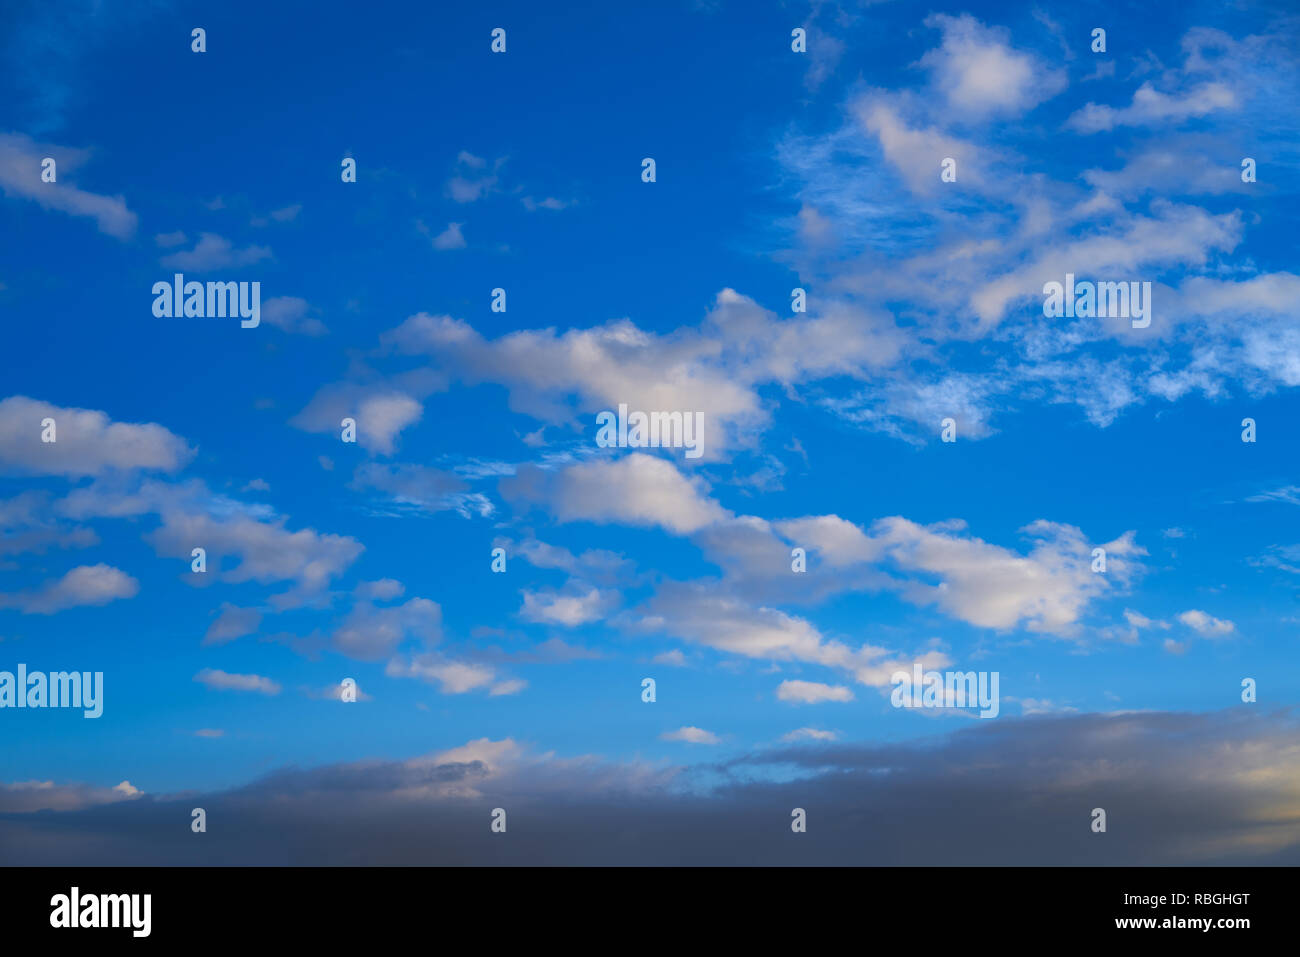 Blue sky at sunset background with clouds Stock Photo